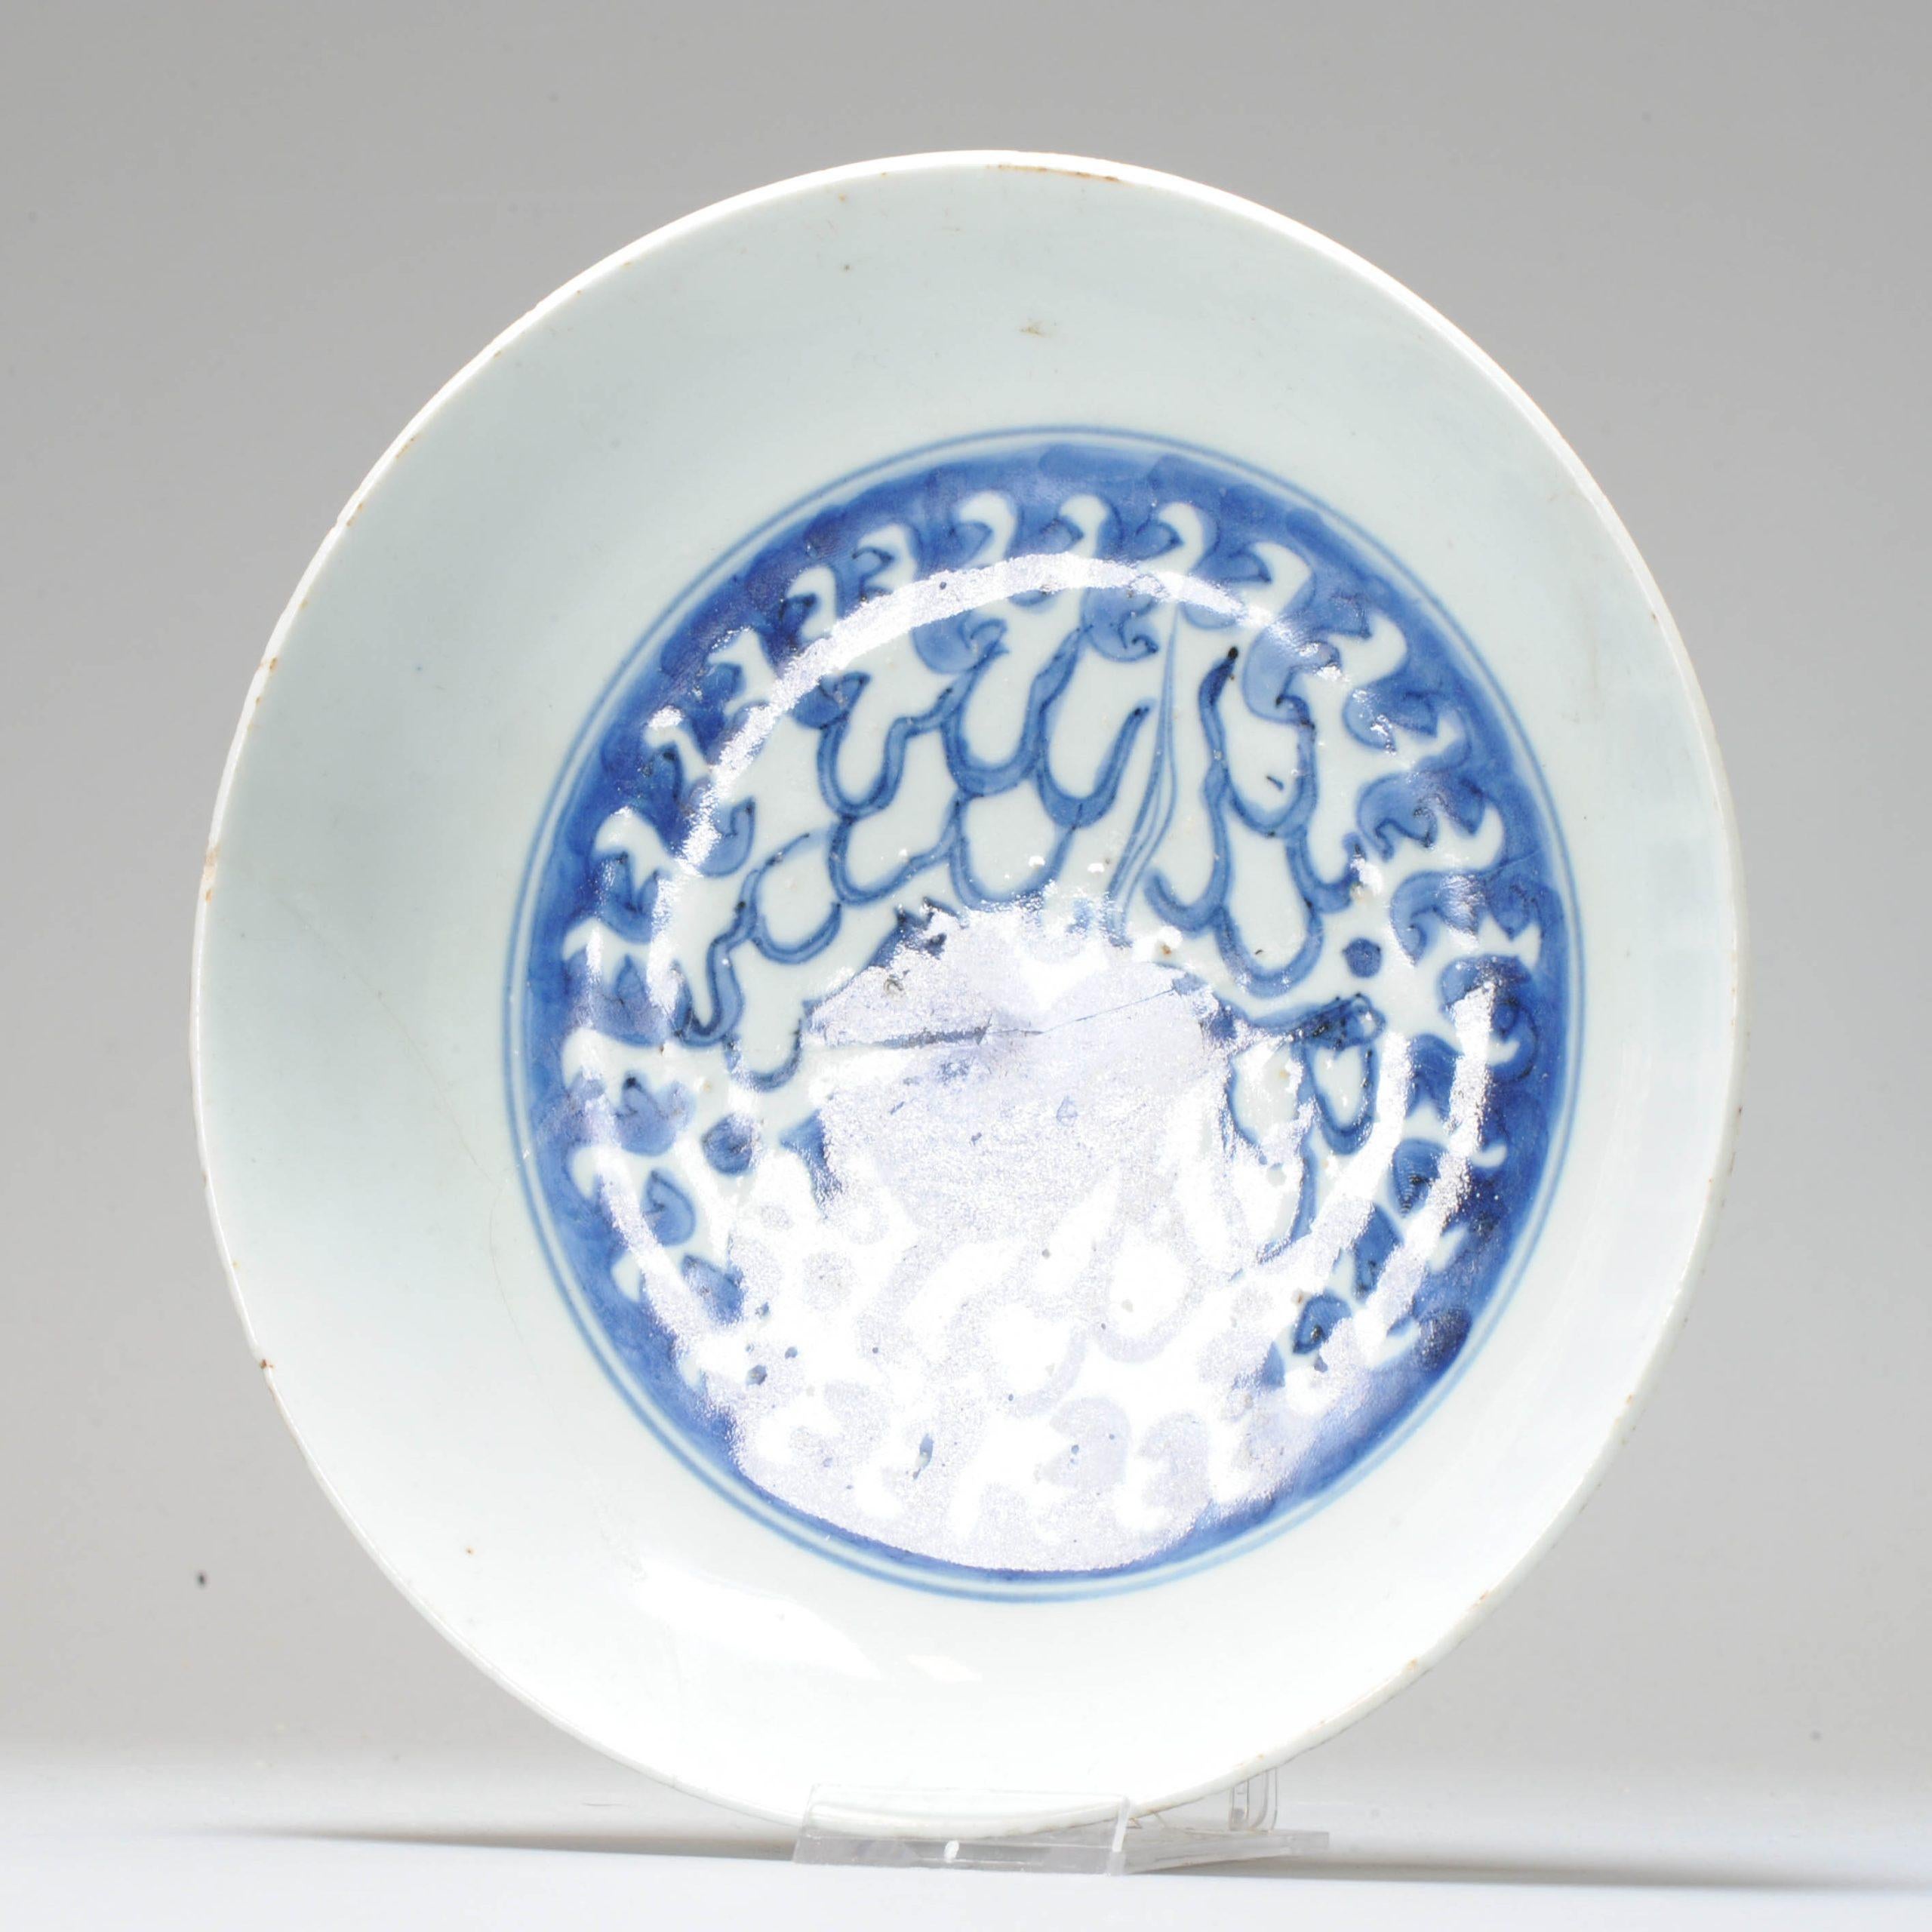 A very nicely decorated plate with a beautiful scene of a flying Horse

With a nice empty rim.

Wanli, Tianqi or Chongzhen Period 1590 – 1640

These kind of dishes are will described in the literature

Condition
Restored (was in half and piece to